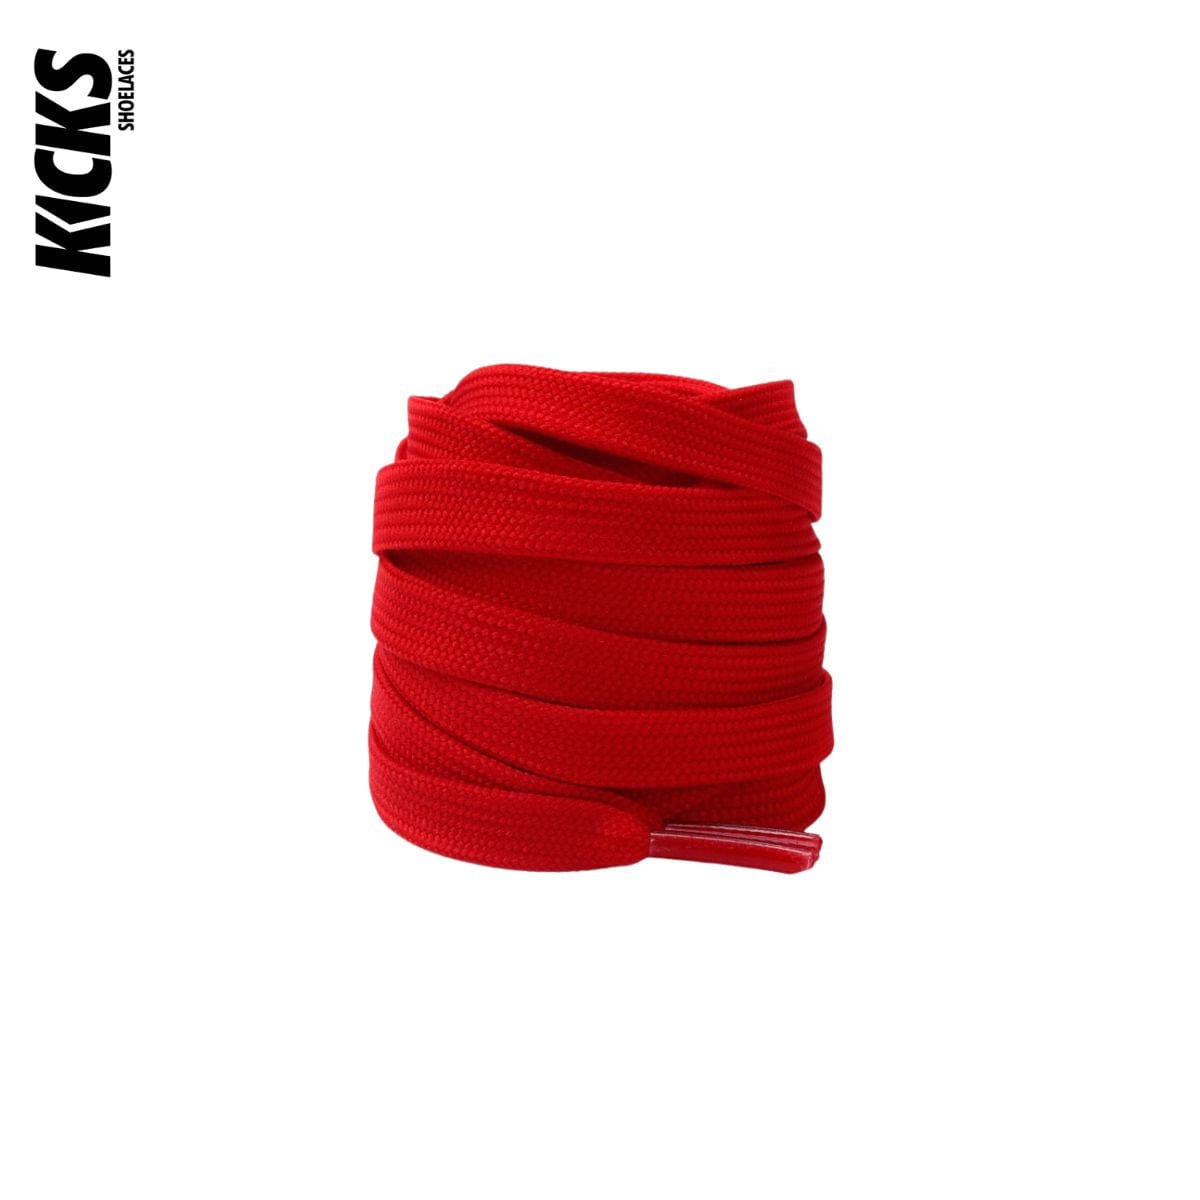 Red Replacement Laces for Adidas EQT Sneakers by Kicks Shoelaces